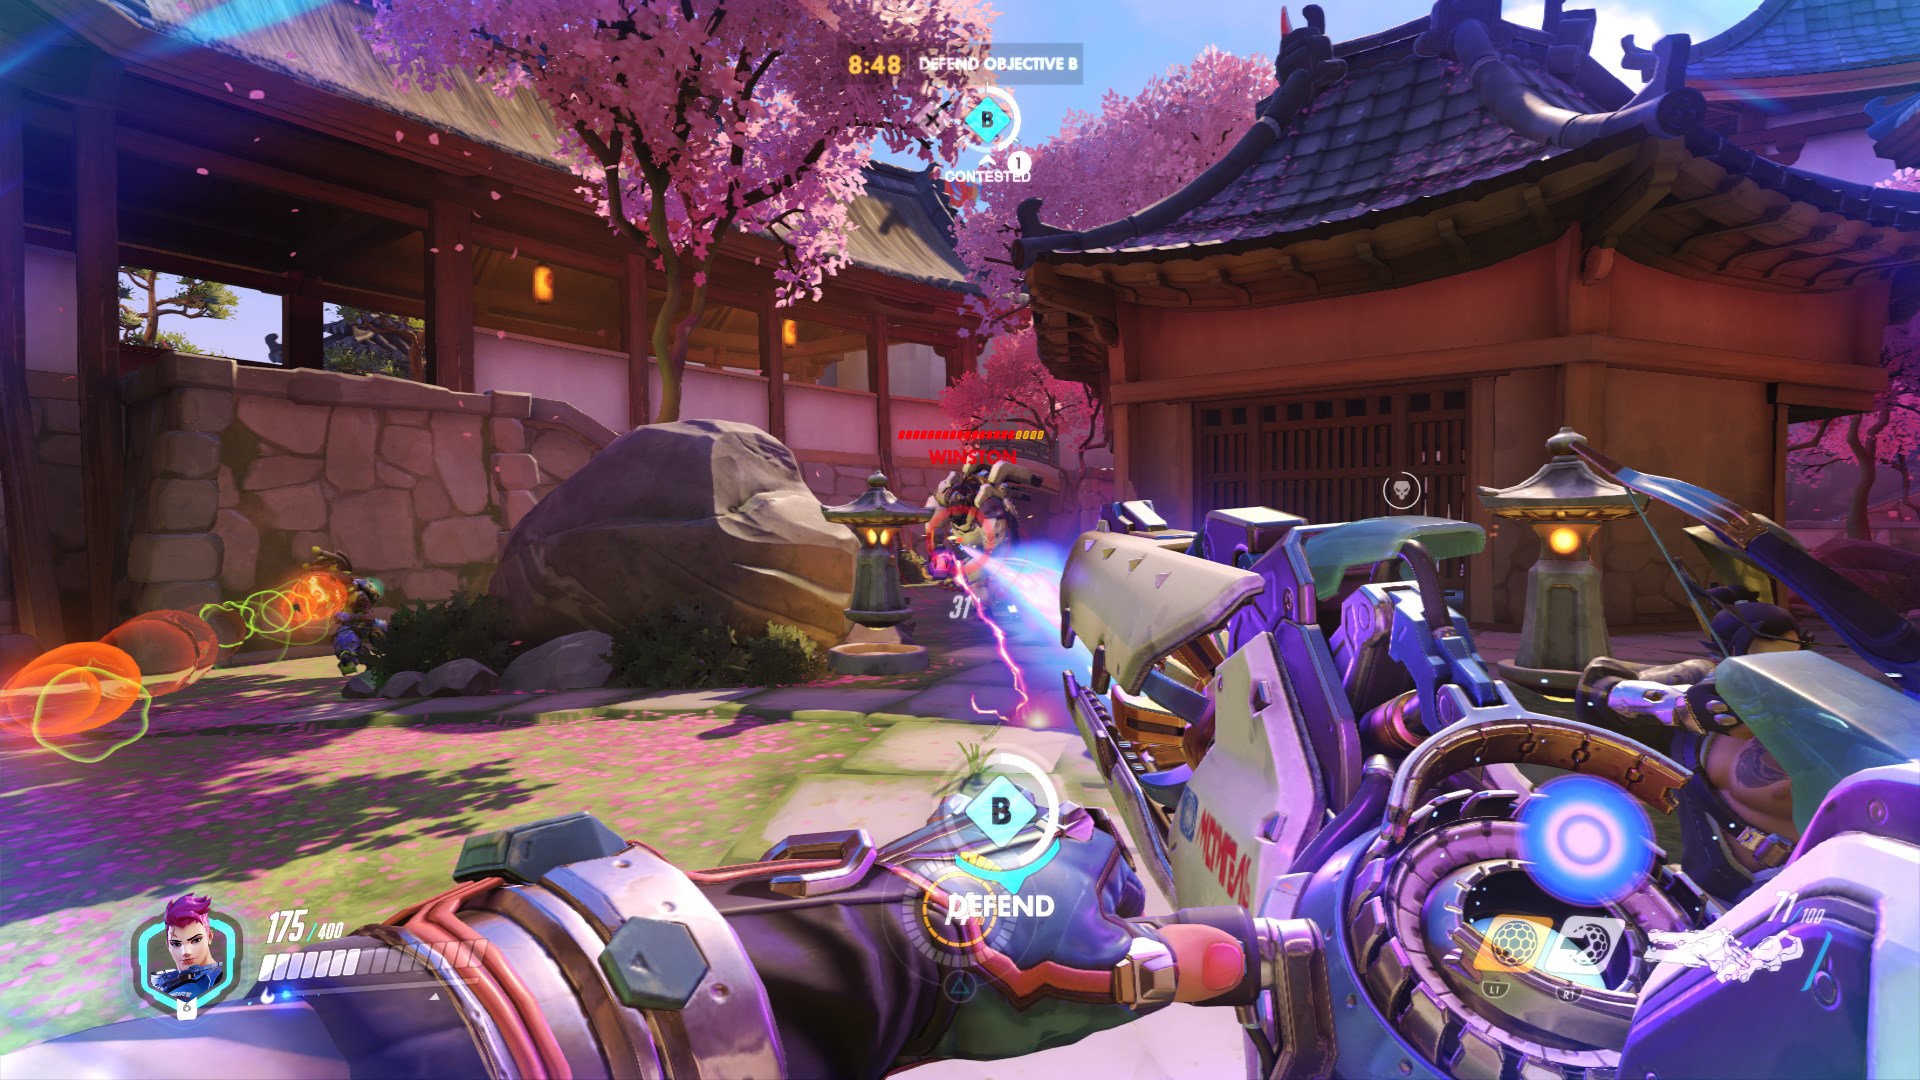 Overwatch 2 Will Support Chinese on Steam -- Superpixel